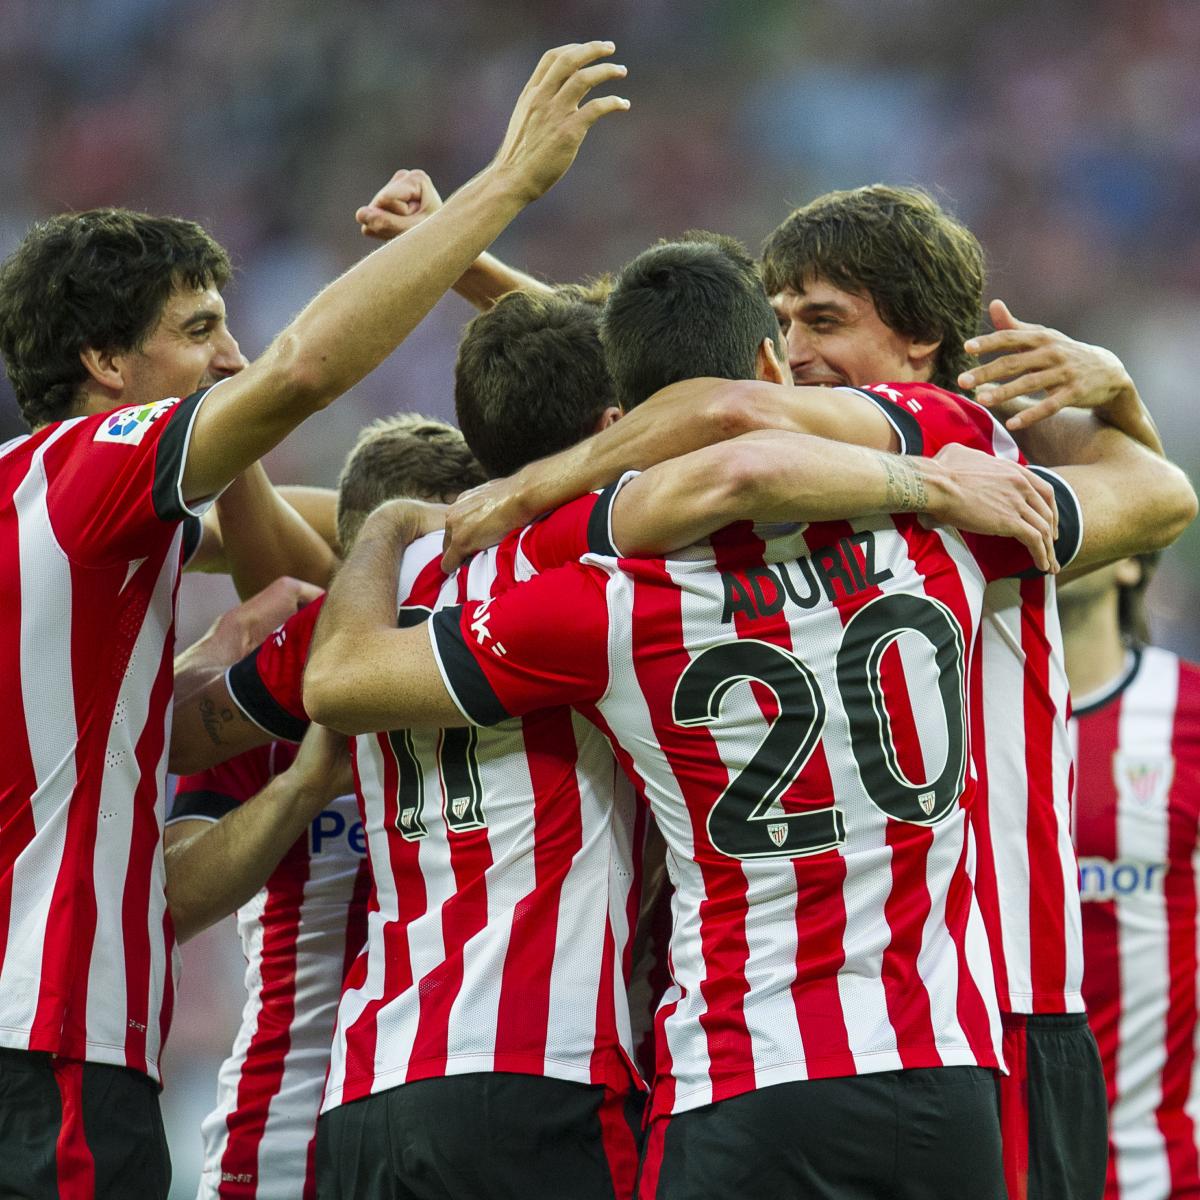 Athletic Bilbao's Basque-only 'philosophy' – and why some are